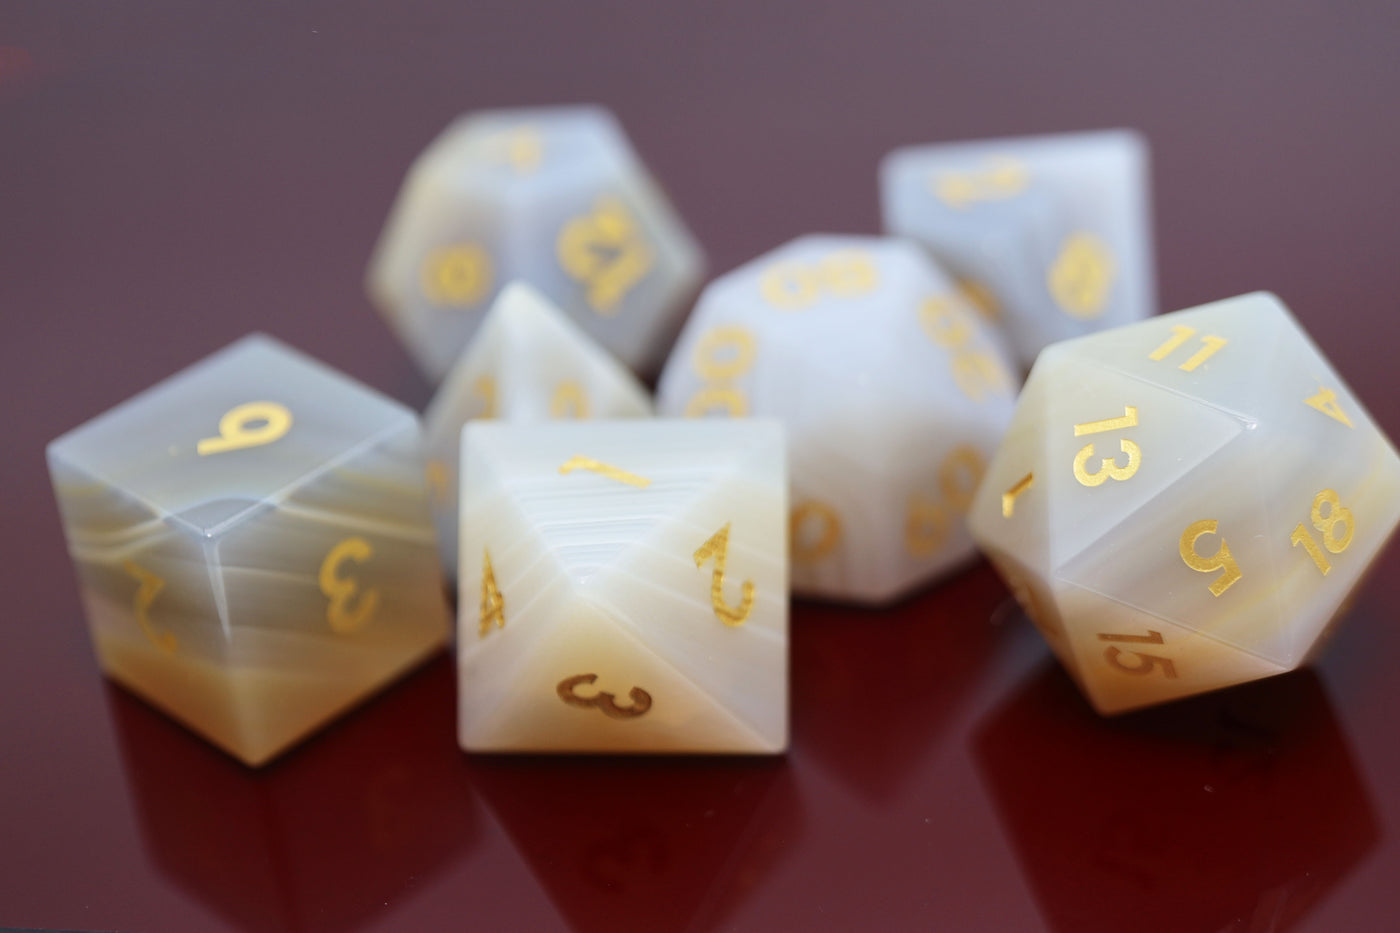 Gray Agate - Gemstone Engraved with Gold Stone Dice Foam Brain Games